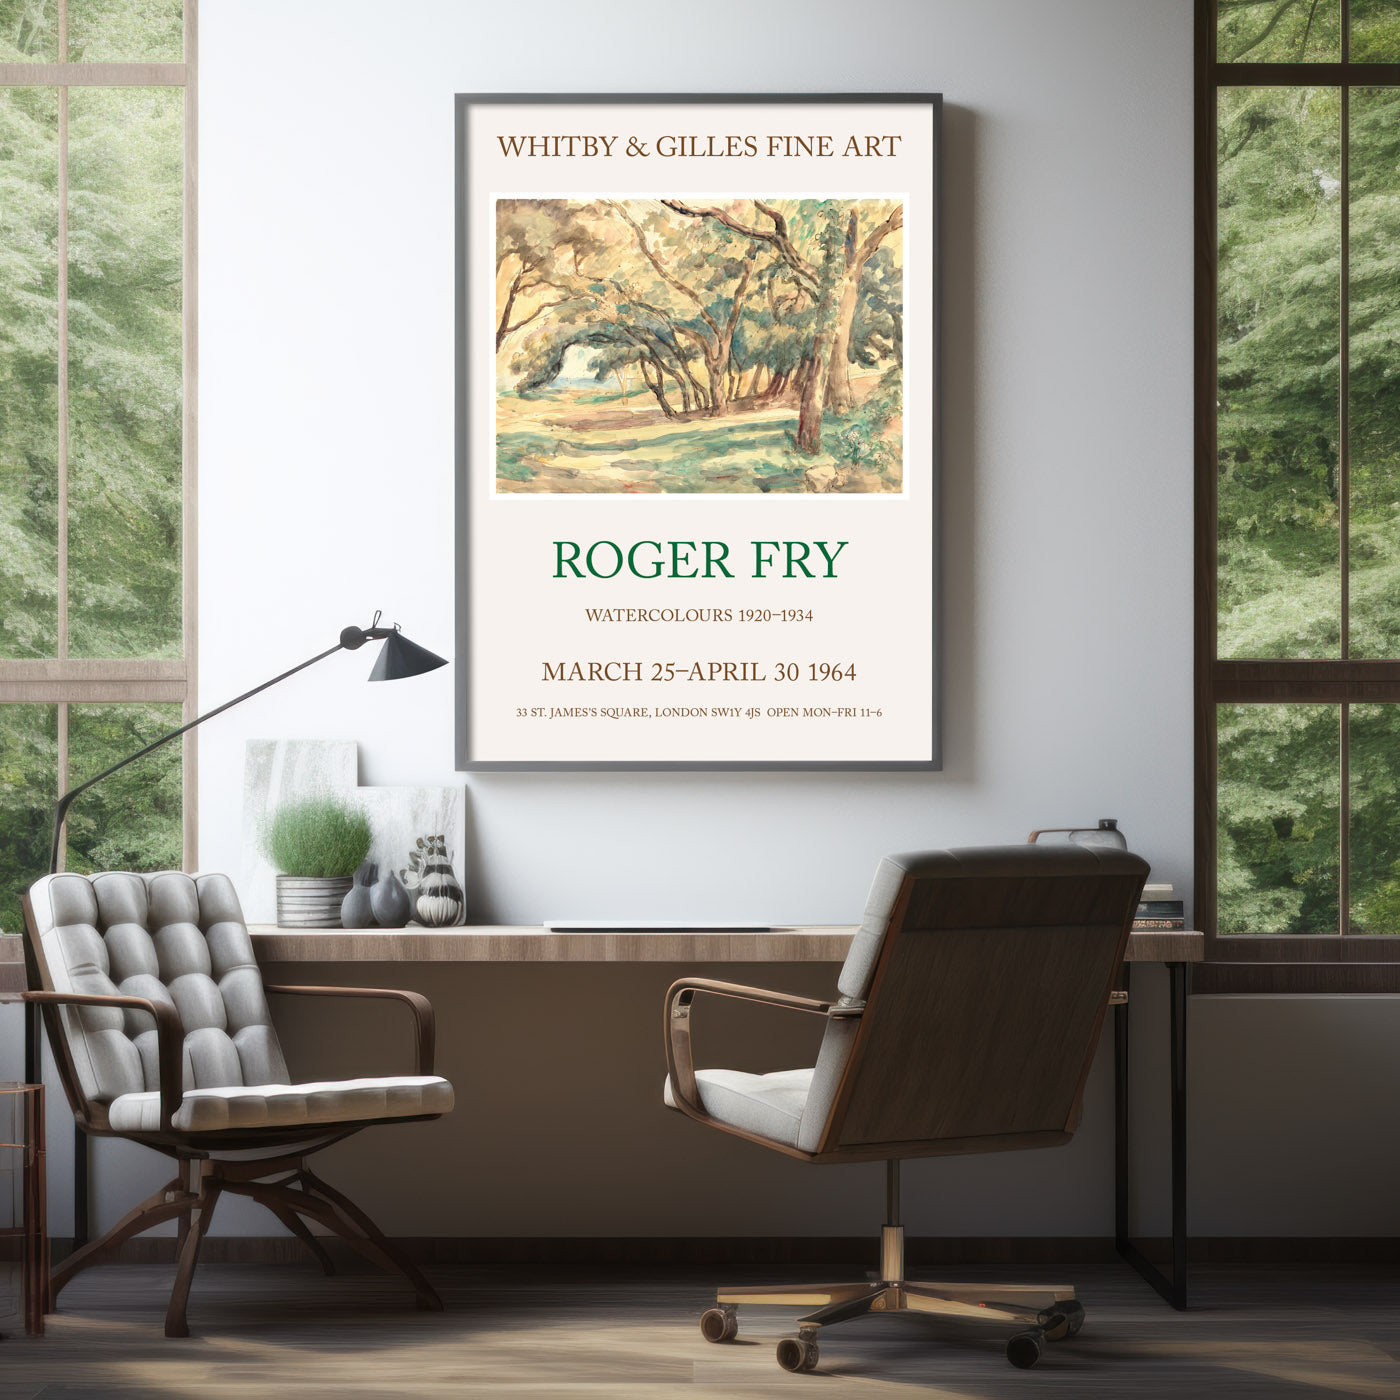 Decorative Art Poster  with Painting by Roger Fry